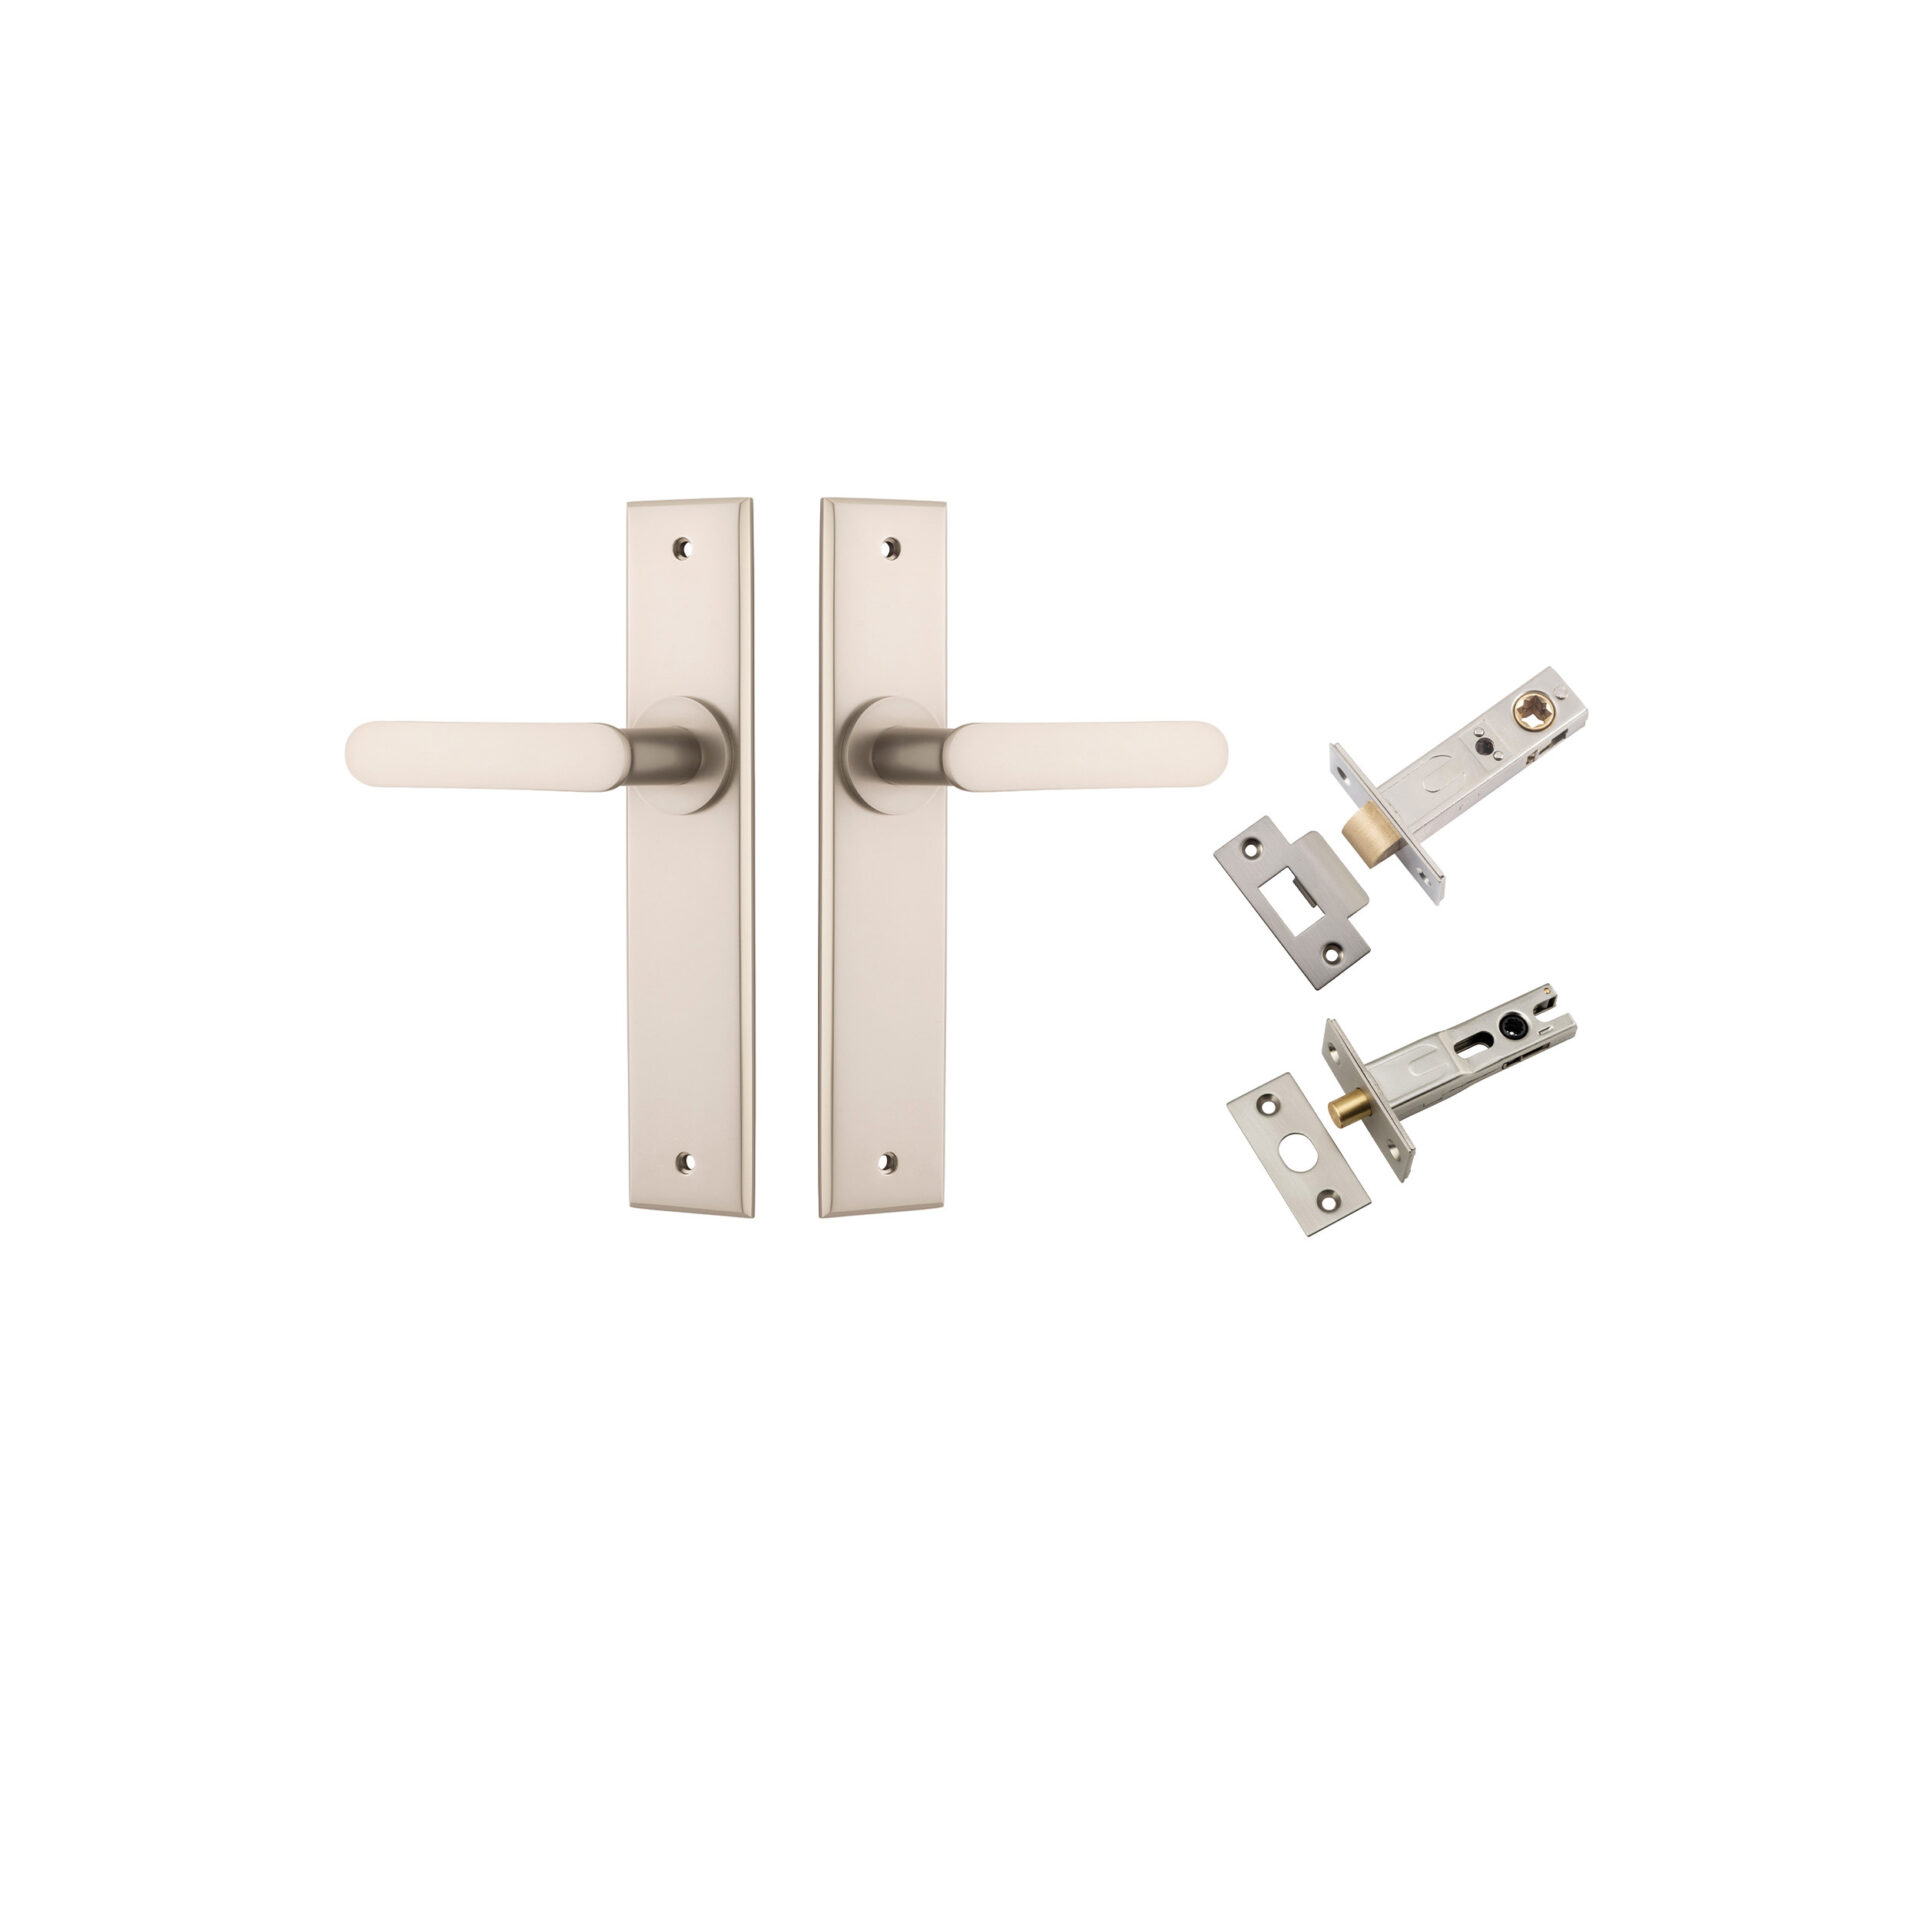 14784KPRIV60 - Bronte Lever - Chamfered Backplate Privacy Kit with Privacy Turn - Satin Nickel - Privacy